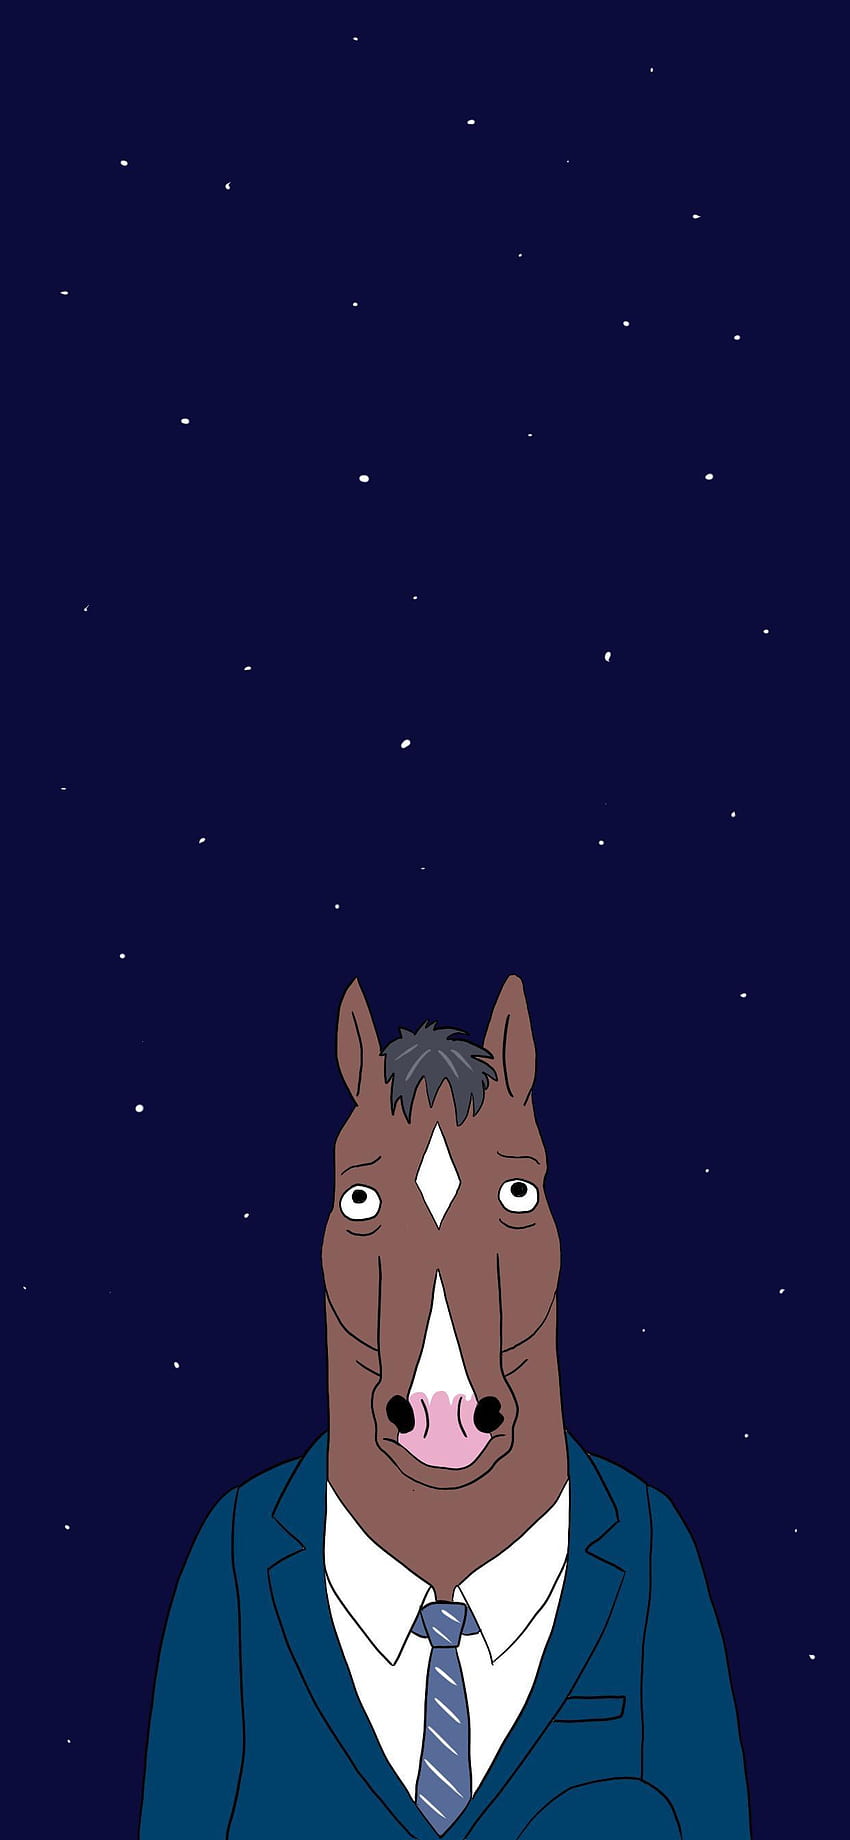 I made a hi res for the last ever episode. Couldn't find any online. It's the dimensions of an iPhone 11 Pro Max. Let me know if you want more of, bojack horseman iphone HD phone wallpaper